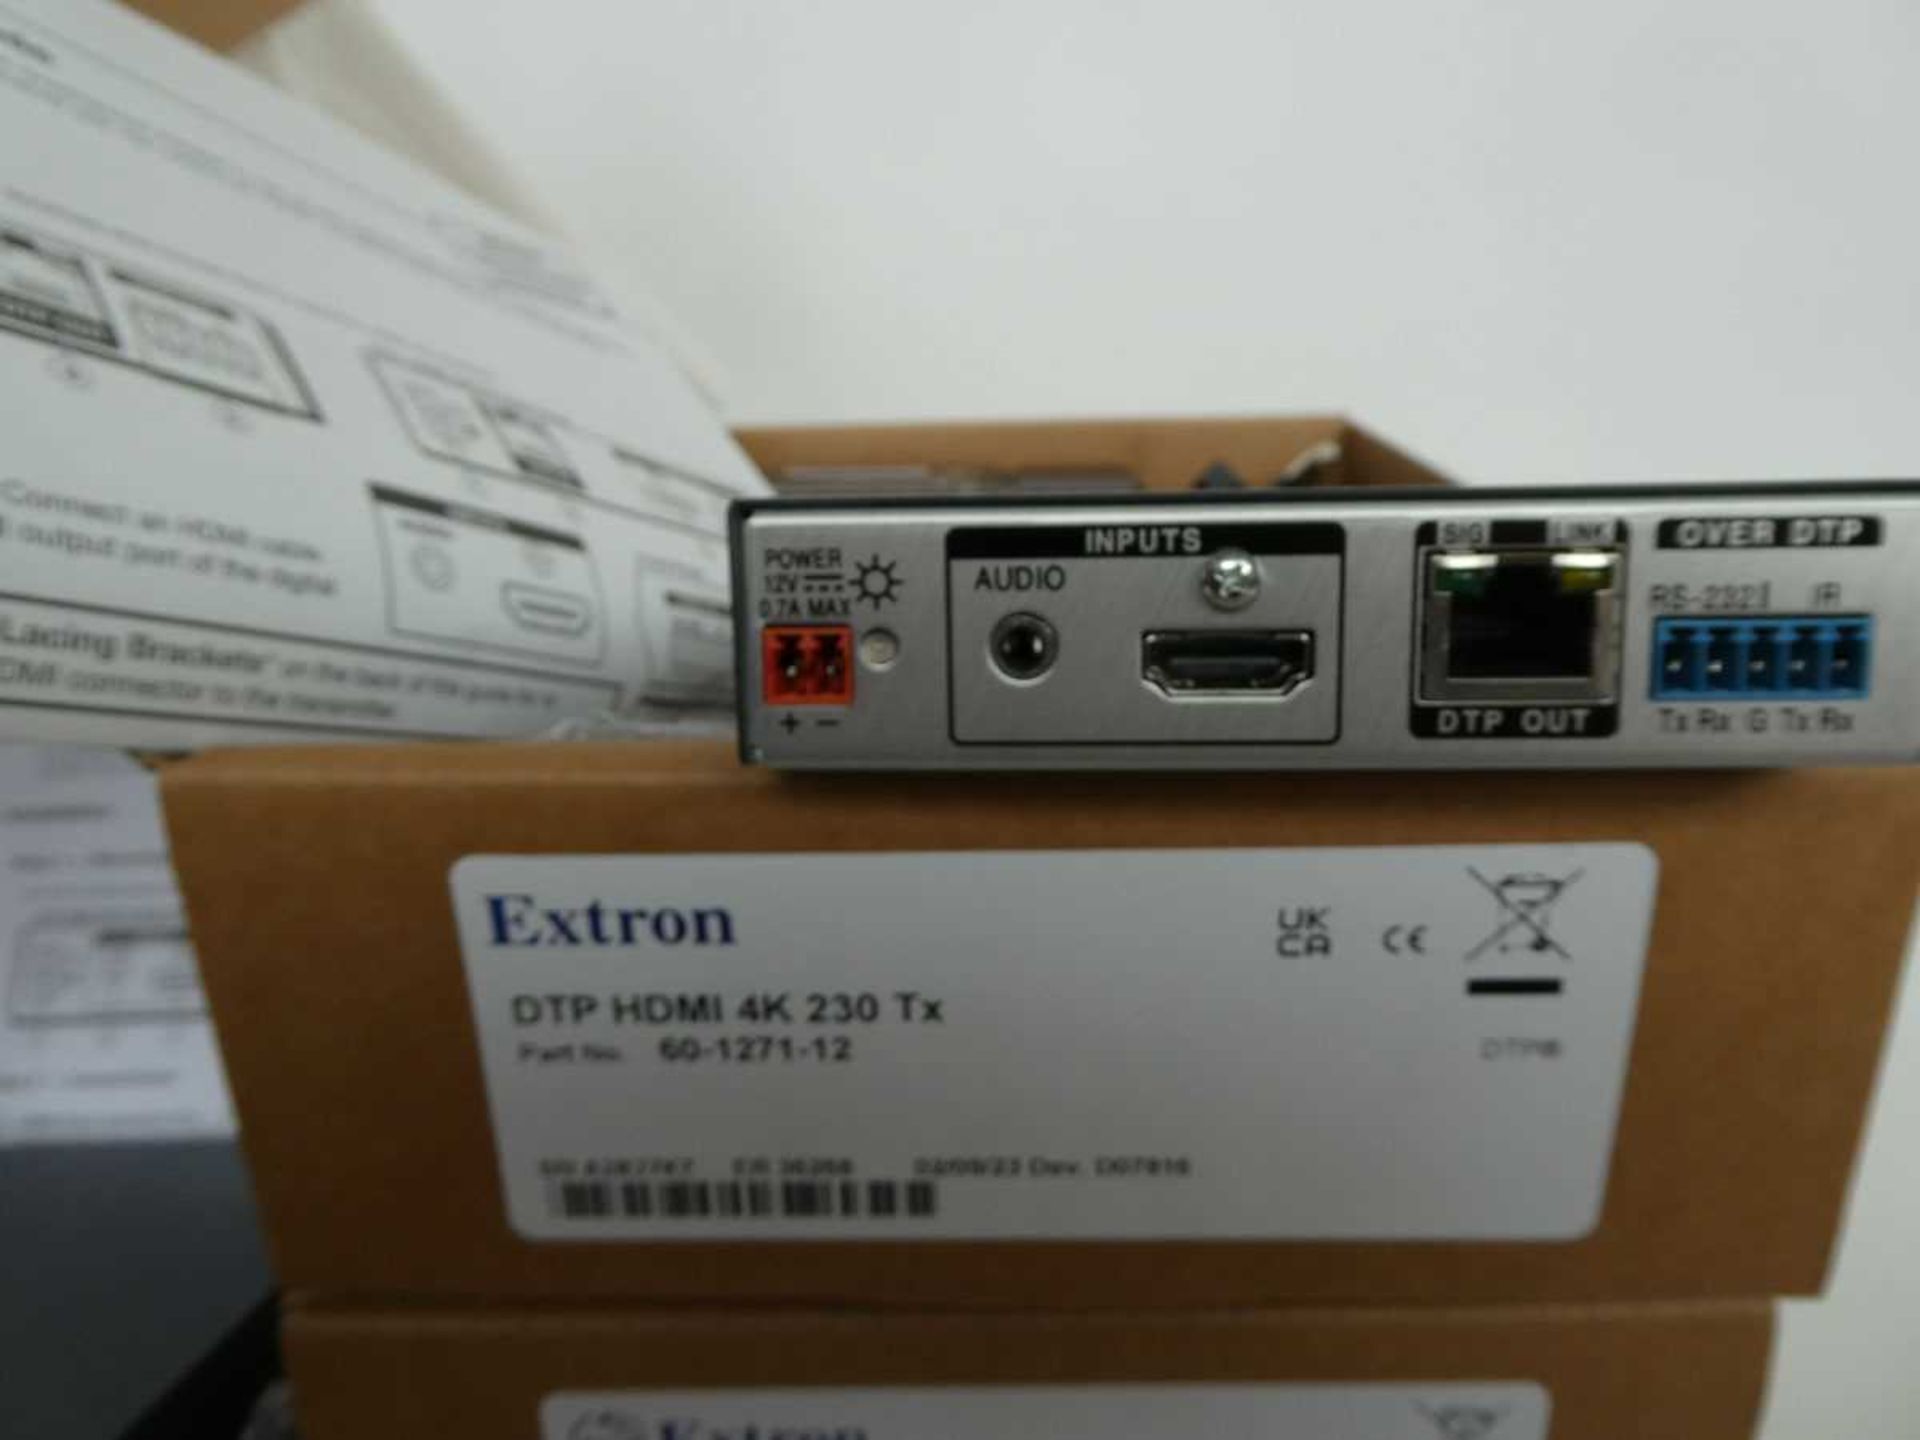 +VAT 5x boxes including 3 Extron DTP HDMI 4K 230 TX transmitters with power supply and boxes, and - Bild 5 aus 6